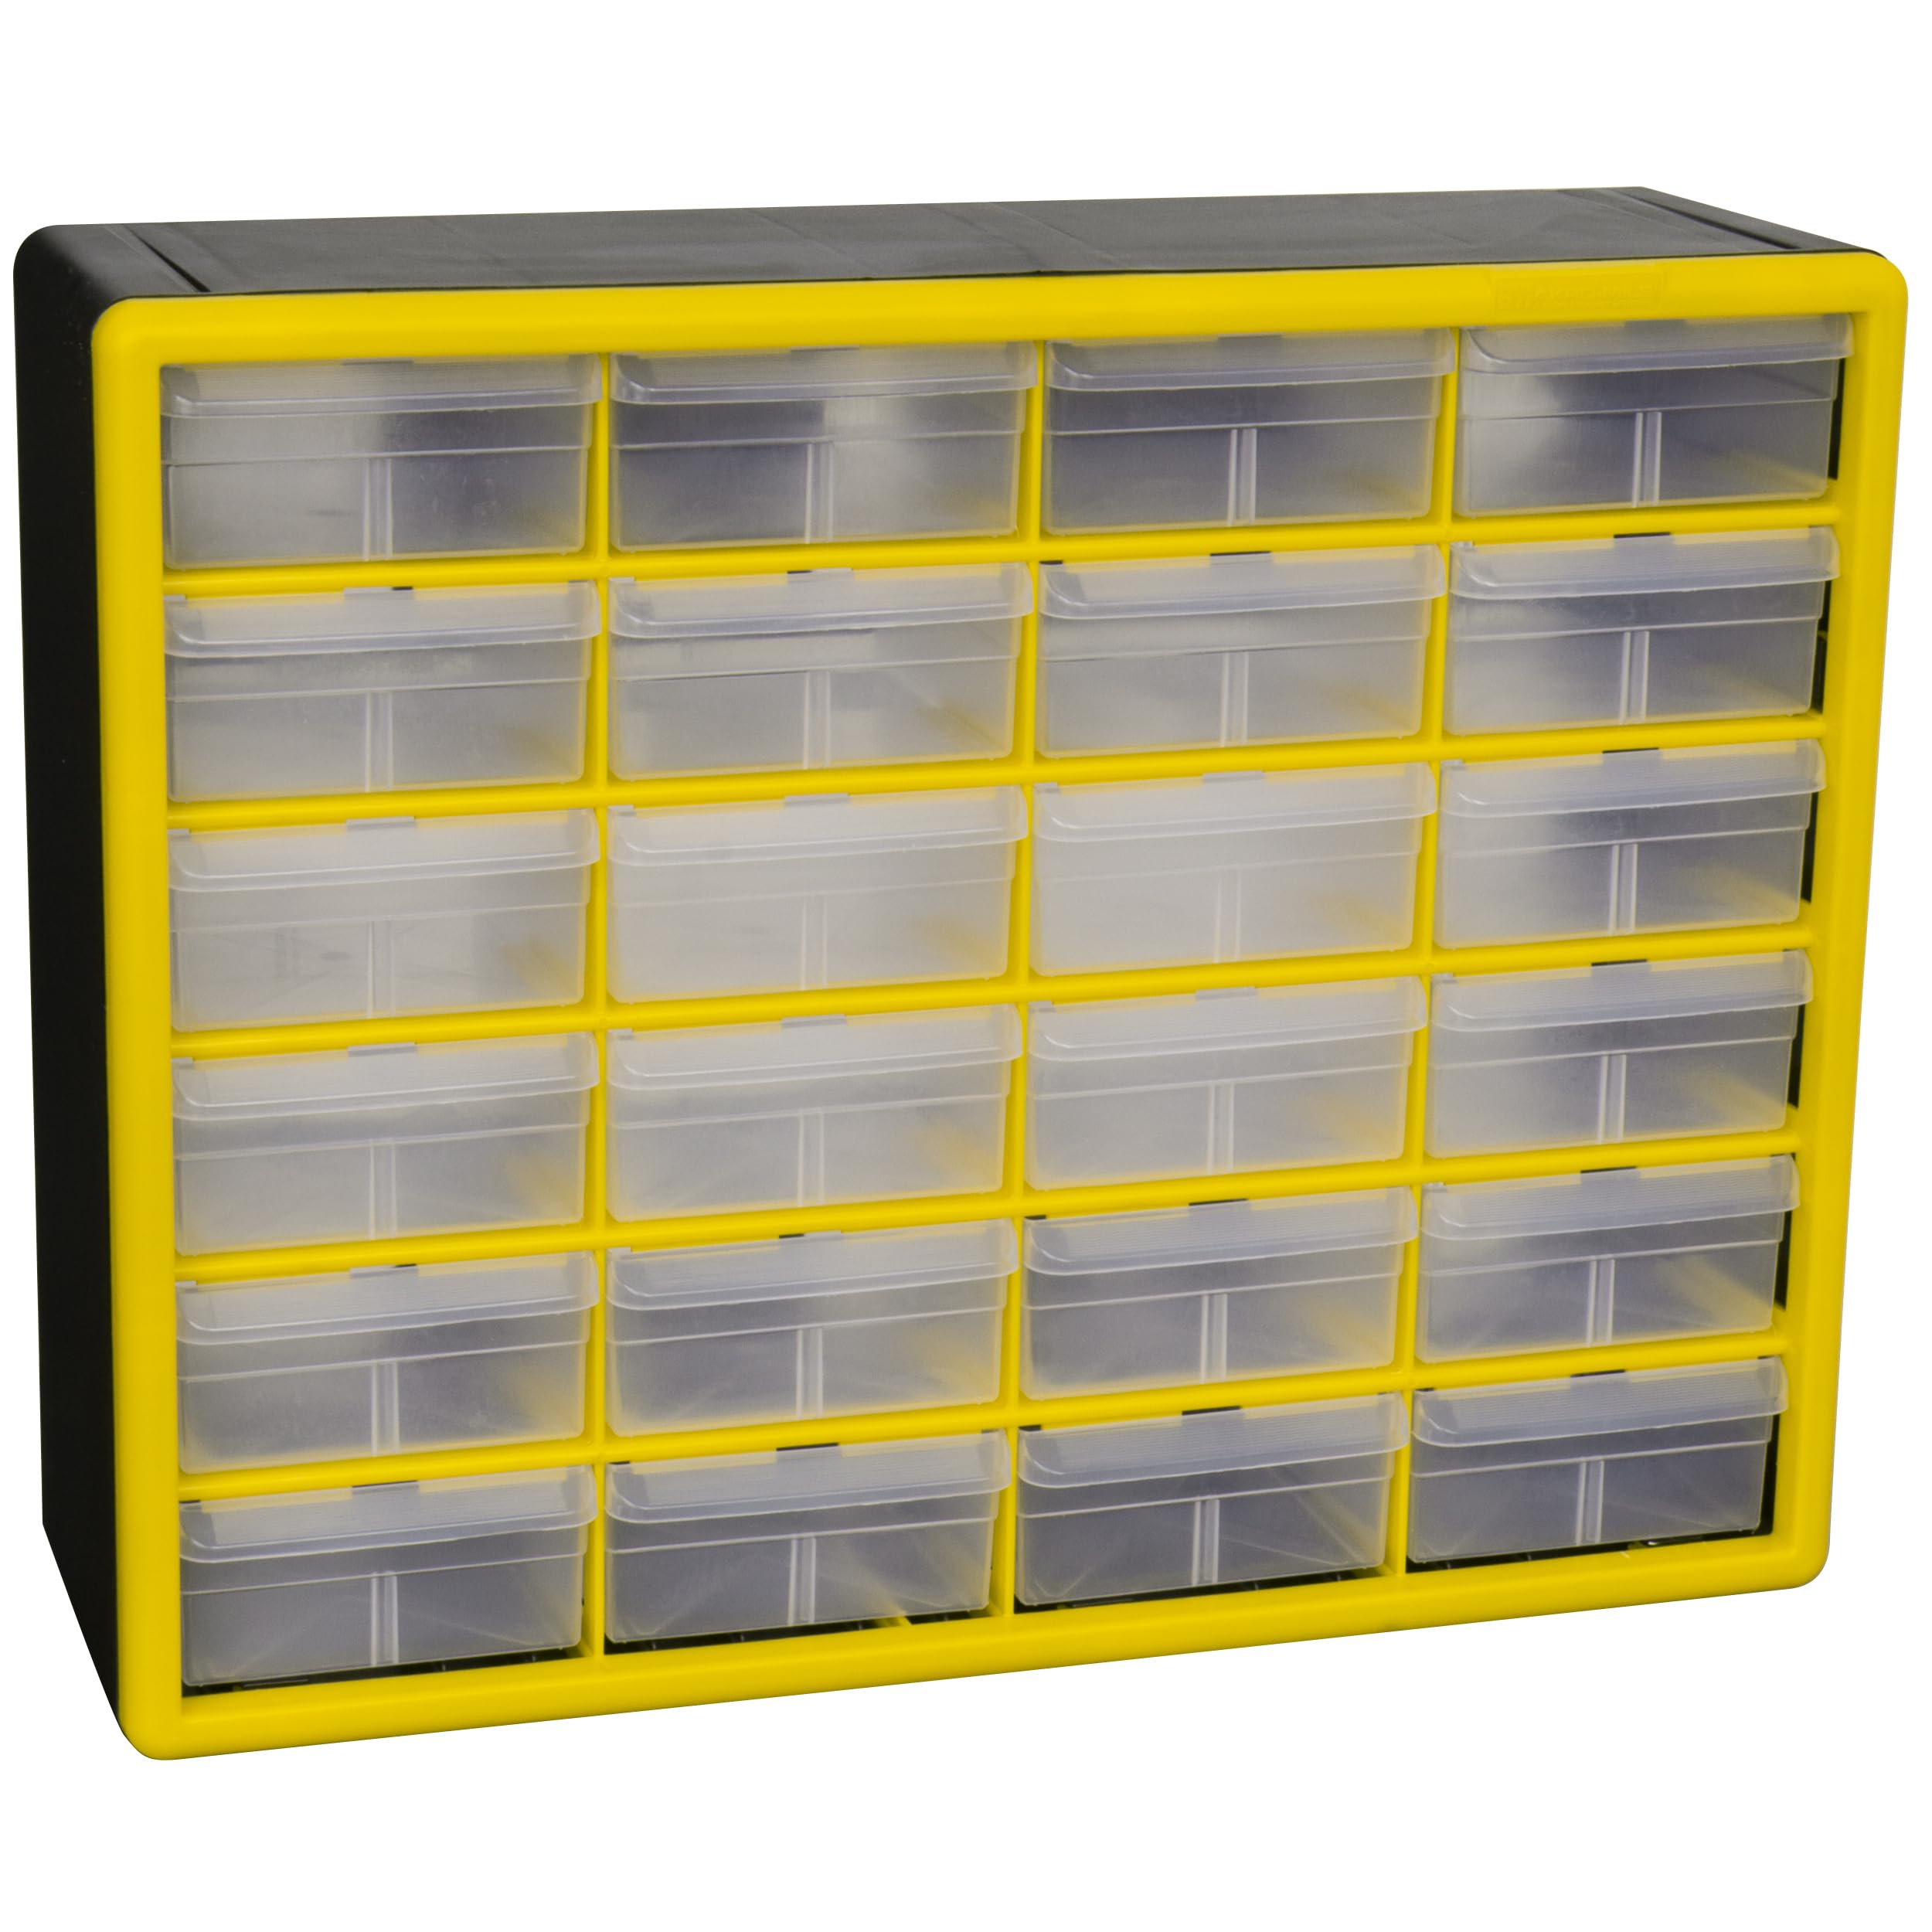 Akro-Mils 10124 24 Drawer Plastic Parts Storage Hardware and Craft Cabinet, 20-Inch W x 6-Inch D x 16-Inch H, Yellow